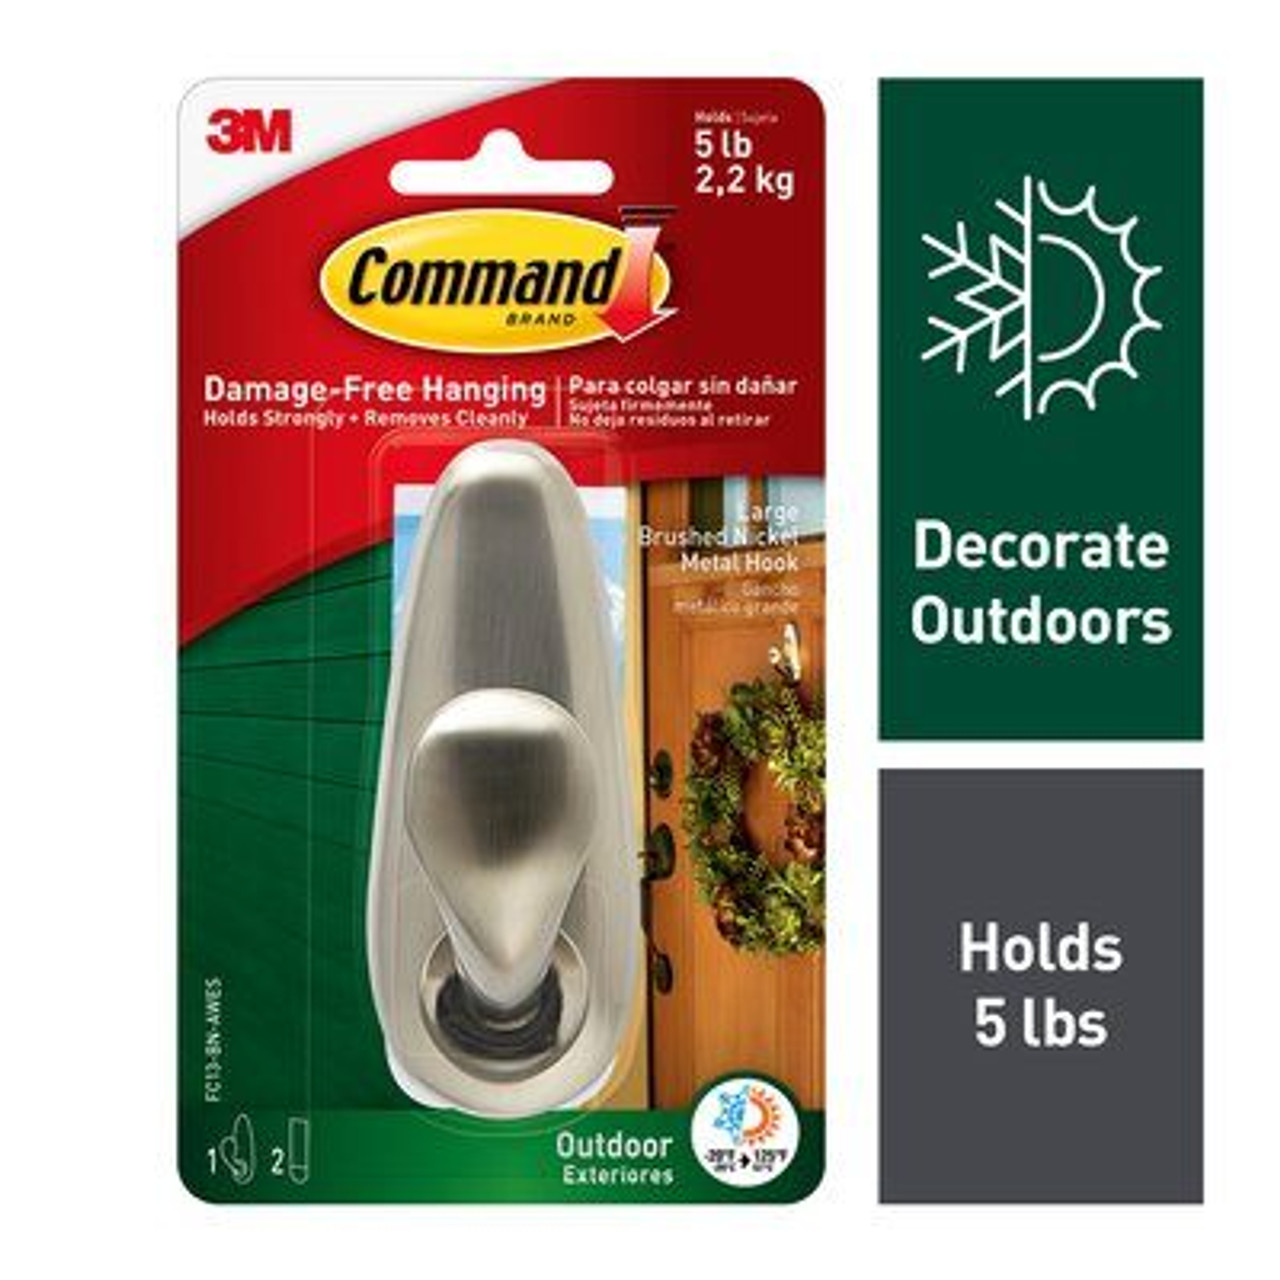 Command™ Outdoor Forever Classic Large Metal Hook with Foam Strips  FC13-BN-AW - 1 hook/pack - The Binding Source